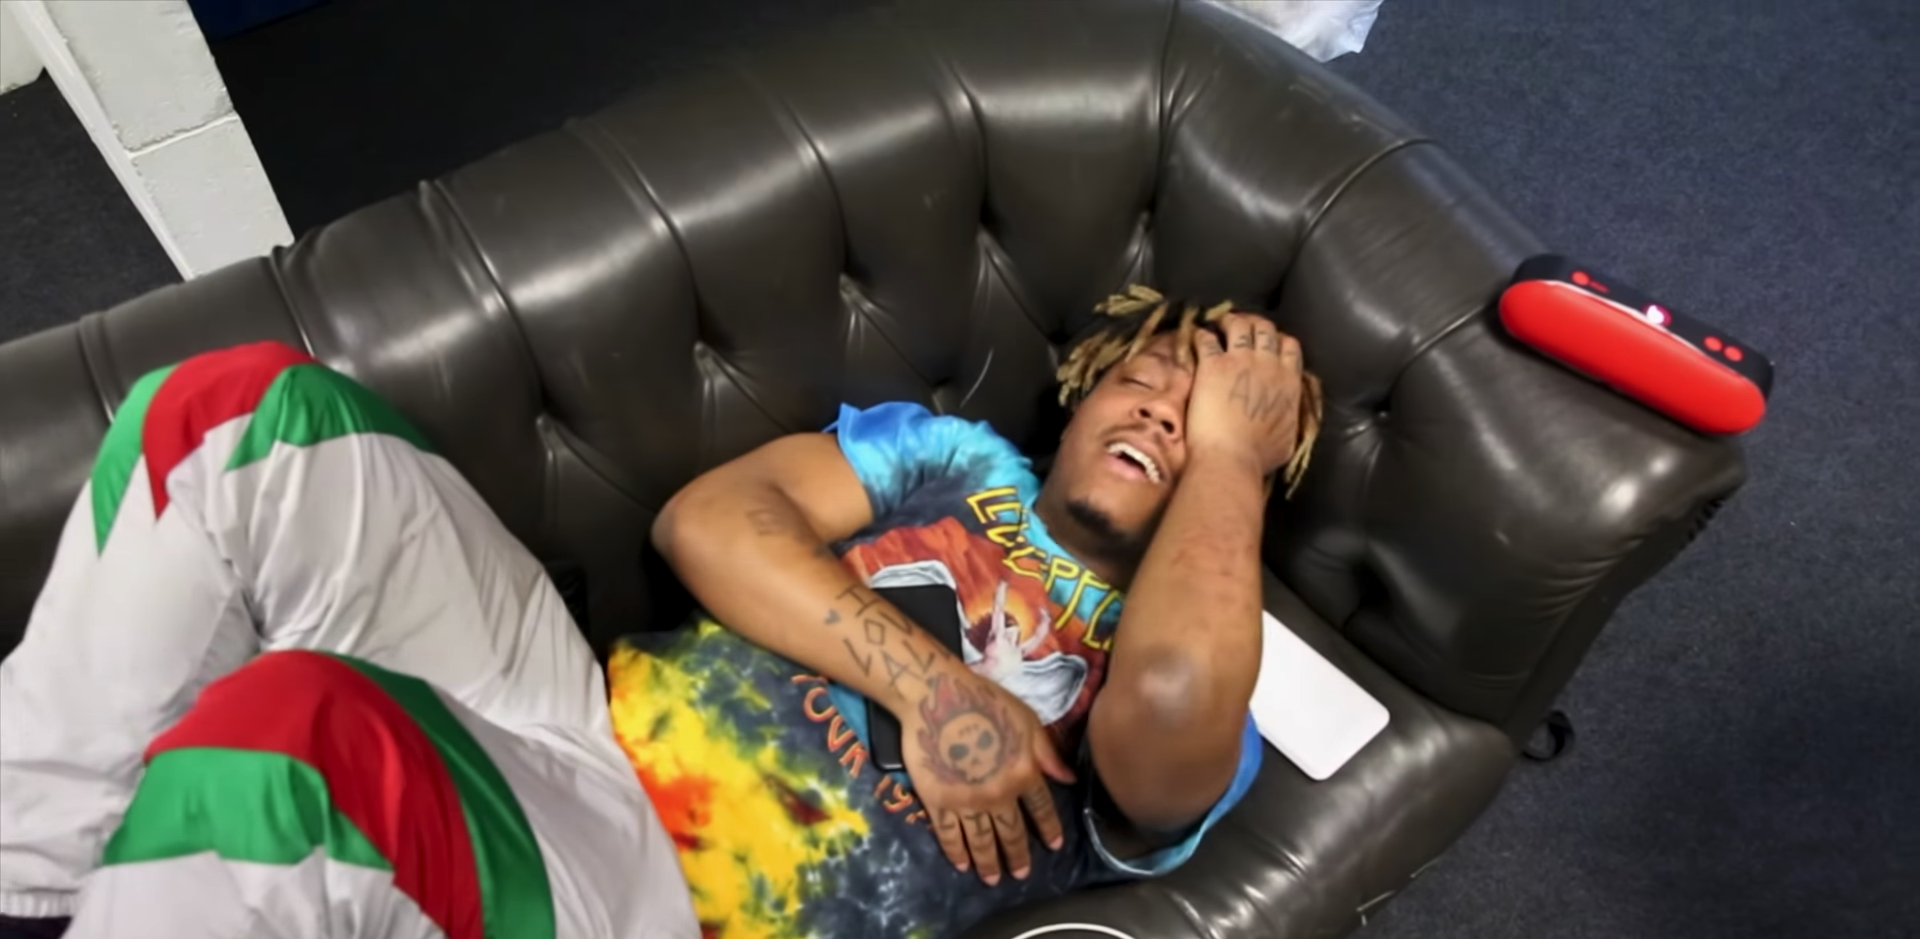 Watch Juice WRLD’s New “Conversations” Video That Features Unseen Freestyle